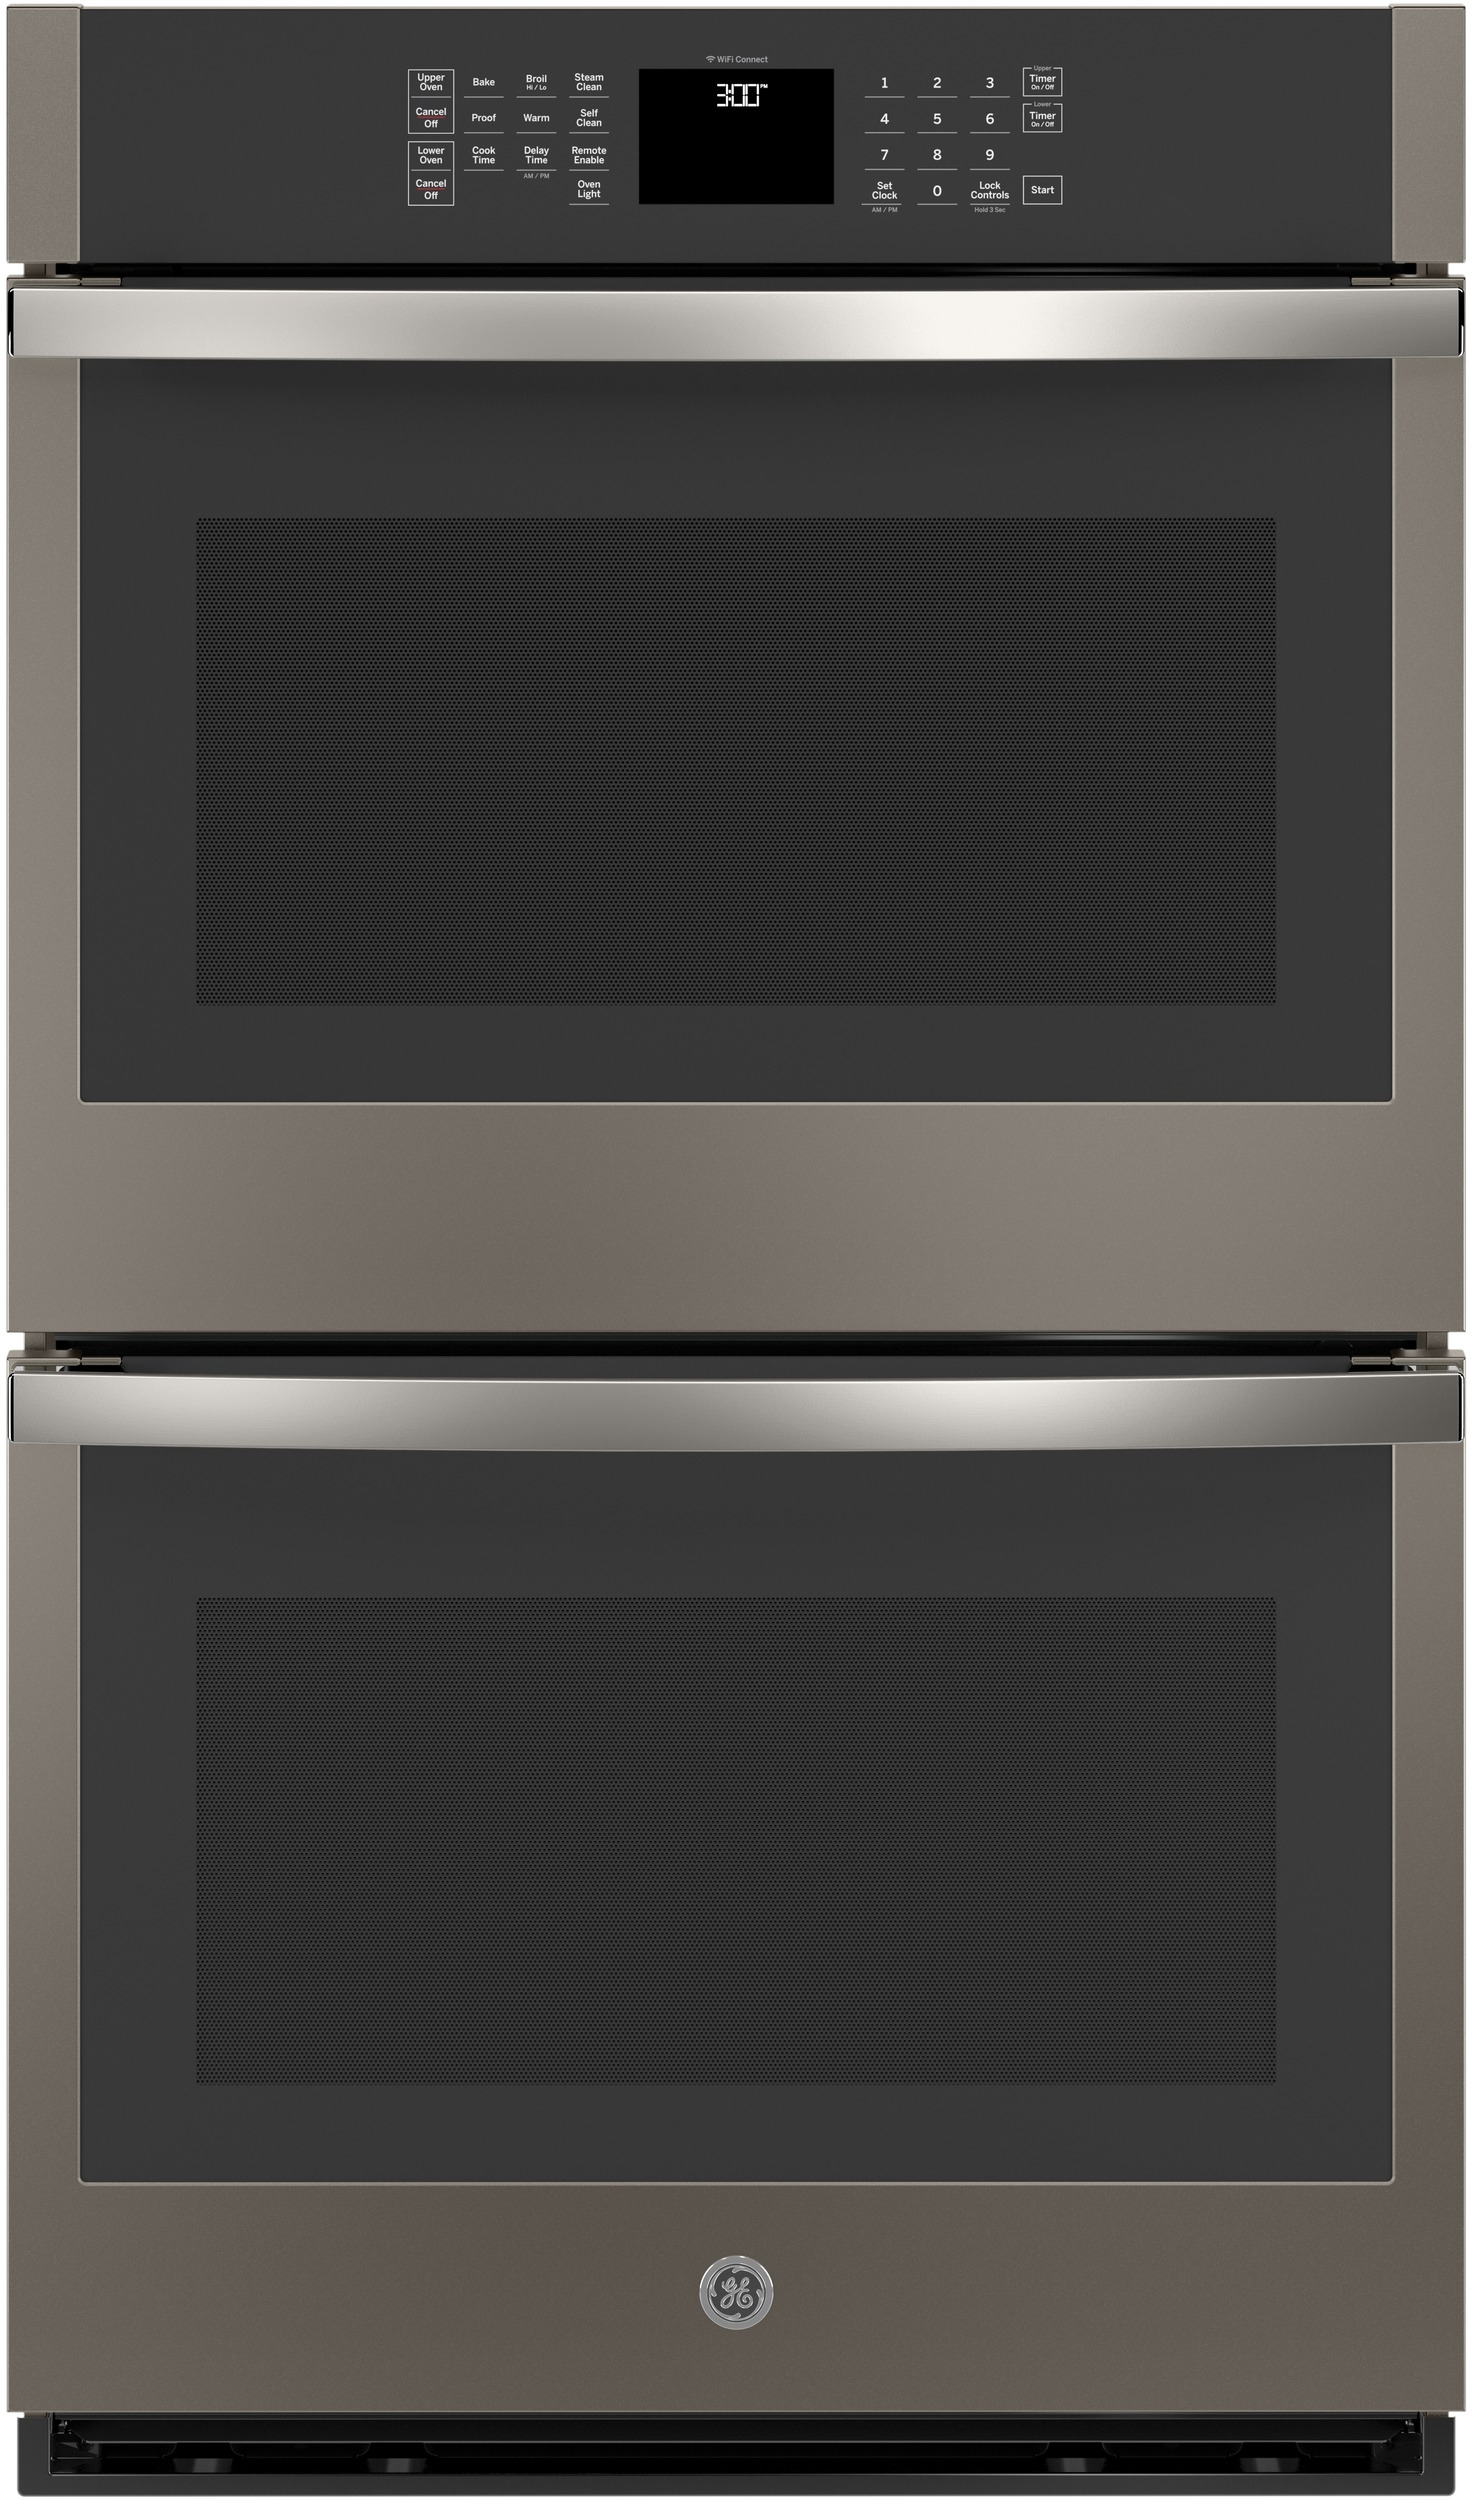 GE® 30" Stainless Steel Electric Built In Double Oven-JTD3000SNSS